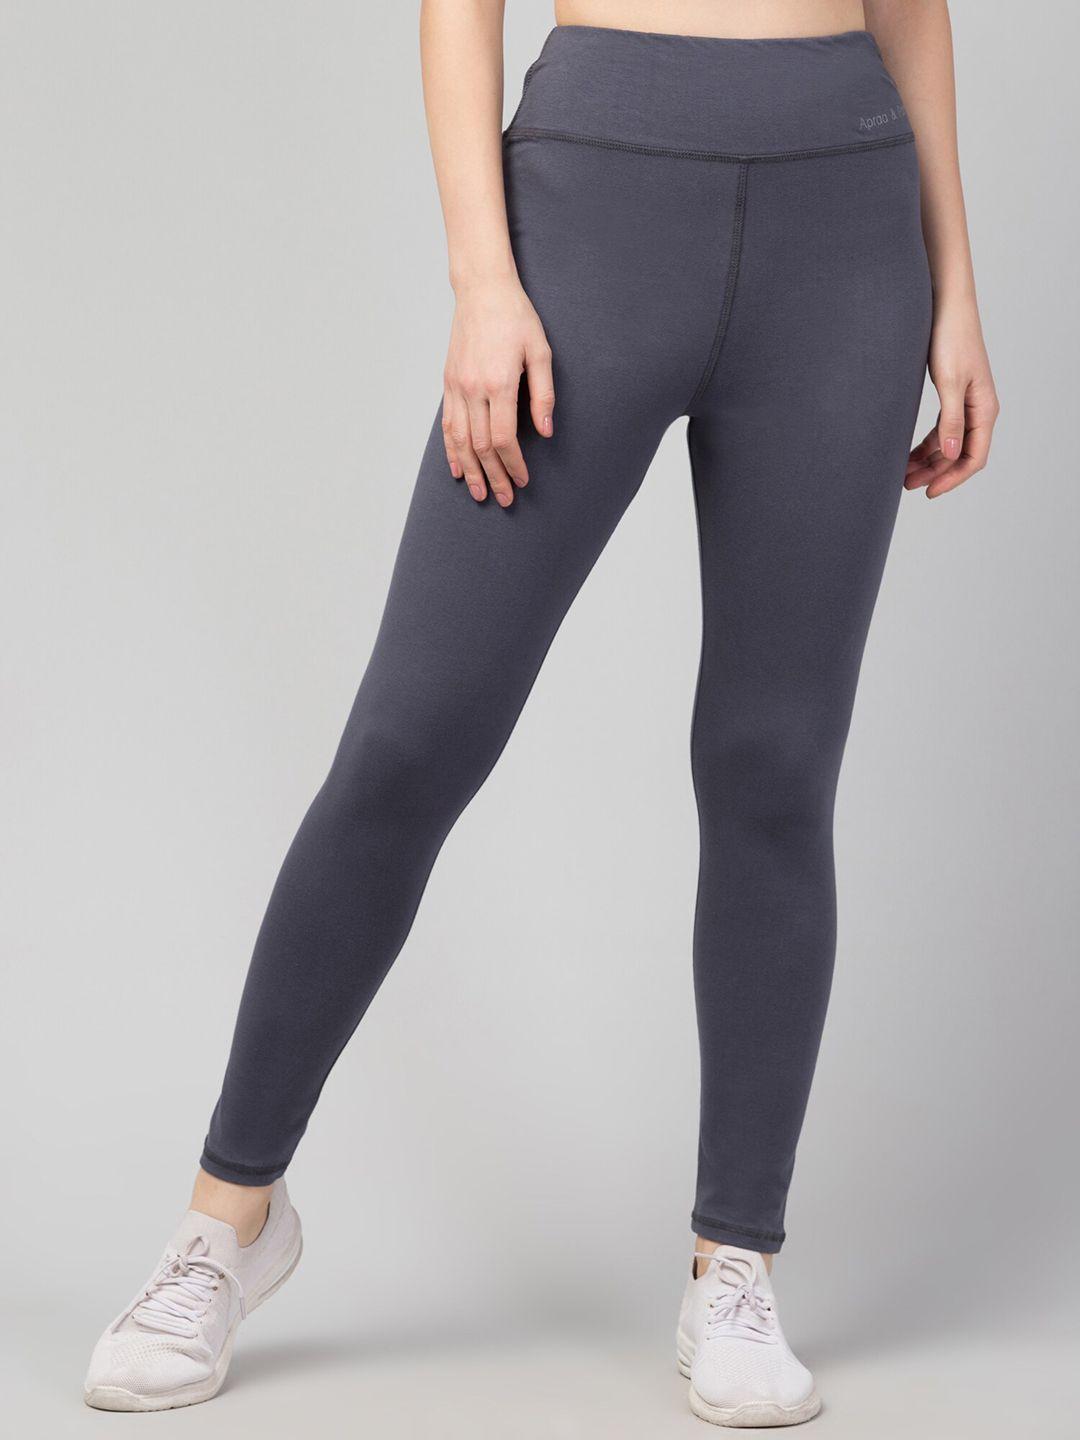 apraa & parma ankle length tights